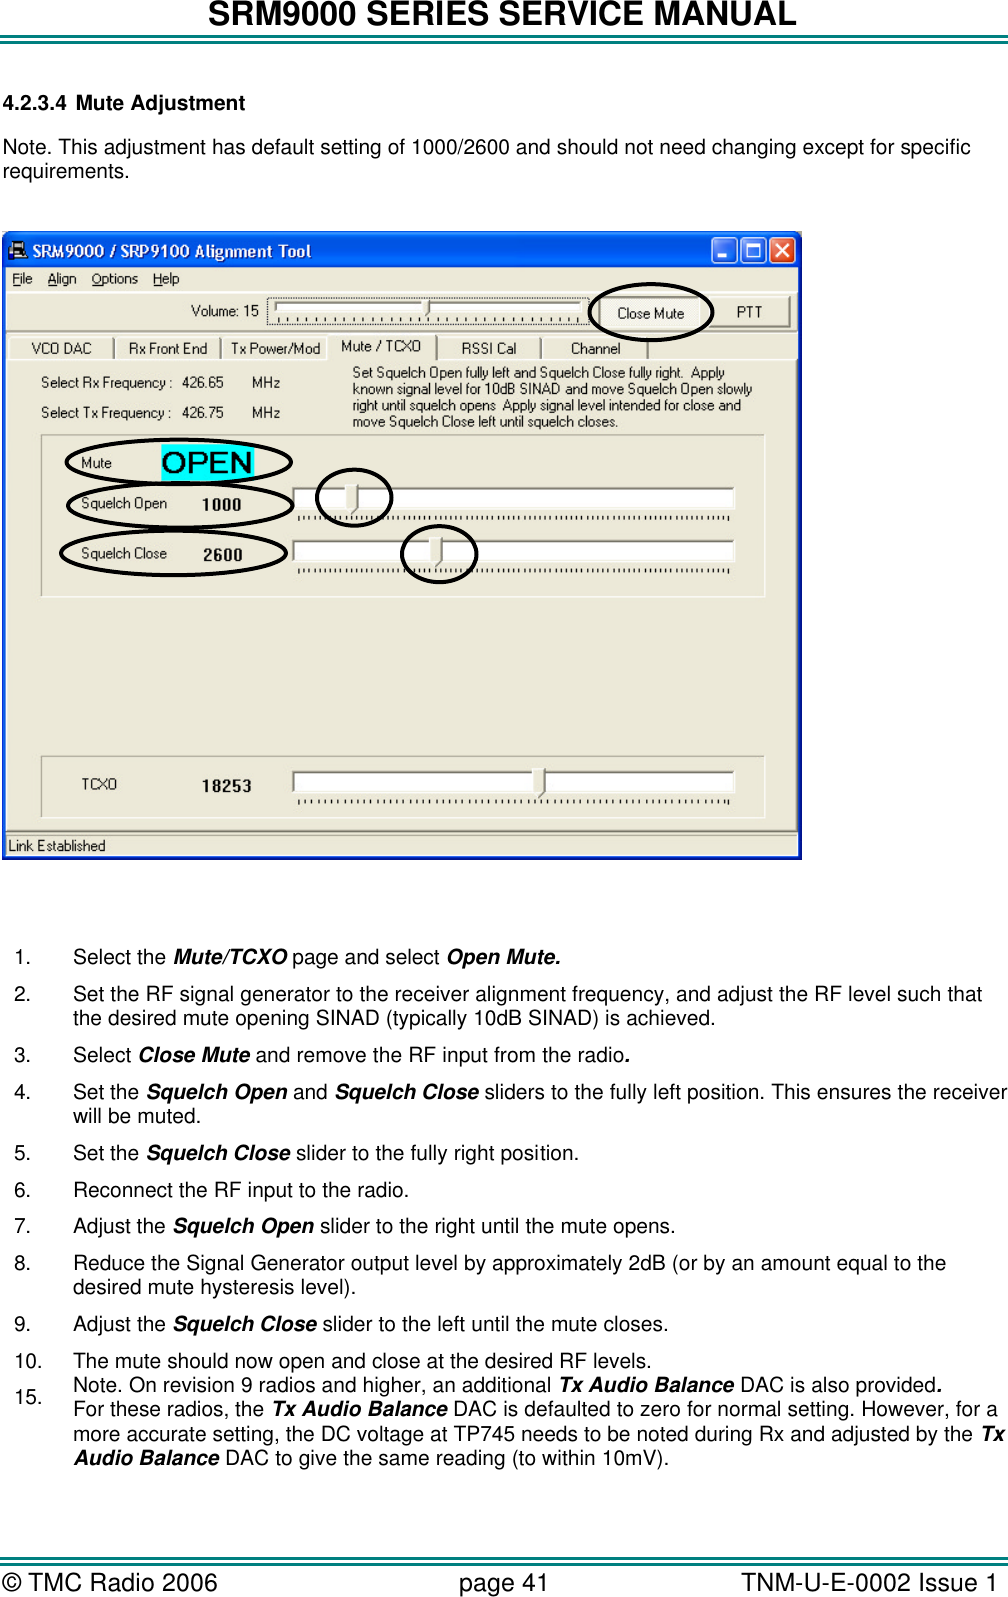 SRM9000 SERIES SERVICE MANUAL © TMC Radio 2006 page 41   TNM-U-E-0002 Issue 1  4.2.3.4 Mute Adjustment Note. This adjustment has default setting of 1000/2600 and should not need changing except for specific requirements.      1. Select the Mute/TCXO page and select Open Mute. 2. Set the RF signal generator to the receiver alignment frequency, and adjust the RF level such that the desired mute opening SINAD (typically 10dB SINAD) is achieved. 3. Select Close Mute and remove the RF input from the radio. 4. Set the Squelch Open and Squelch Close sliders to the fully left position. This ensures the receiver will be muted. 5. Set the Squelch Close slider to the fully right position. 6. Reconnect the RF input to the radio. 7. Adjust the Squelch Open slider to the right until the mute opens. 8. Reduce the Signal Generator output level by approximately 2dB (or by an amount equal to the desired mute hysteresis level). 9. Adjust the Squelch Close slider to the left until the mute closes. 10. The mute should now open and close at the desired RF levels. 15. Note. On revision 9 radios and higher, an additional Tx Audio Balance DAC is also provided. For these radios, the Tx Audio Balance DAC is defaulted to zero for normal setting. However, for a more accurate setting, the DC voltage at TP745 needs to be noted during Rx and adjusted by the Tx Audio Balance DAC to give the same reading (to within 10mV).  